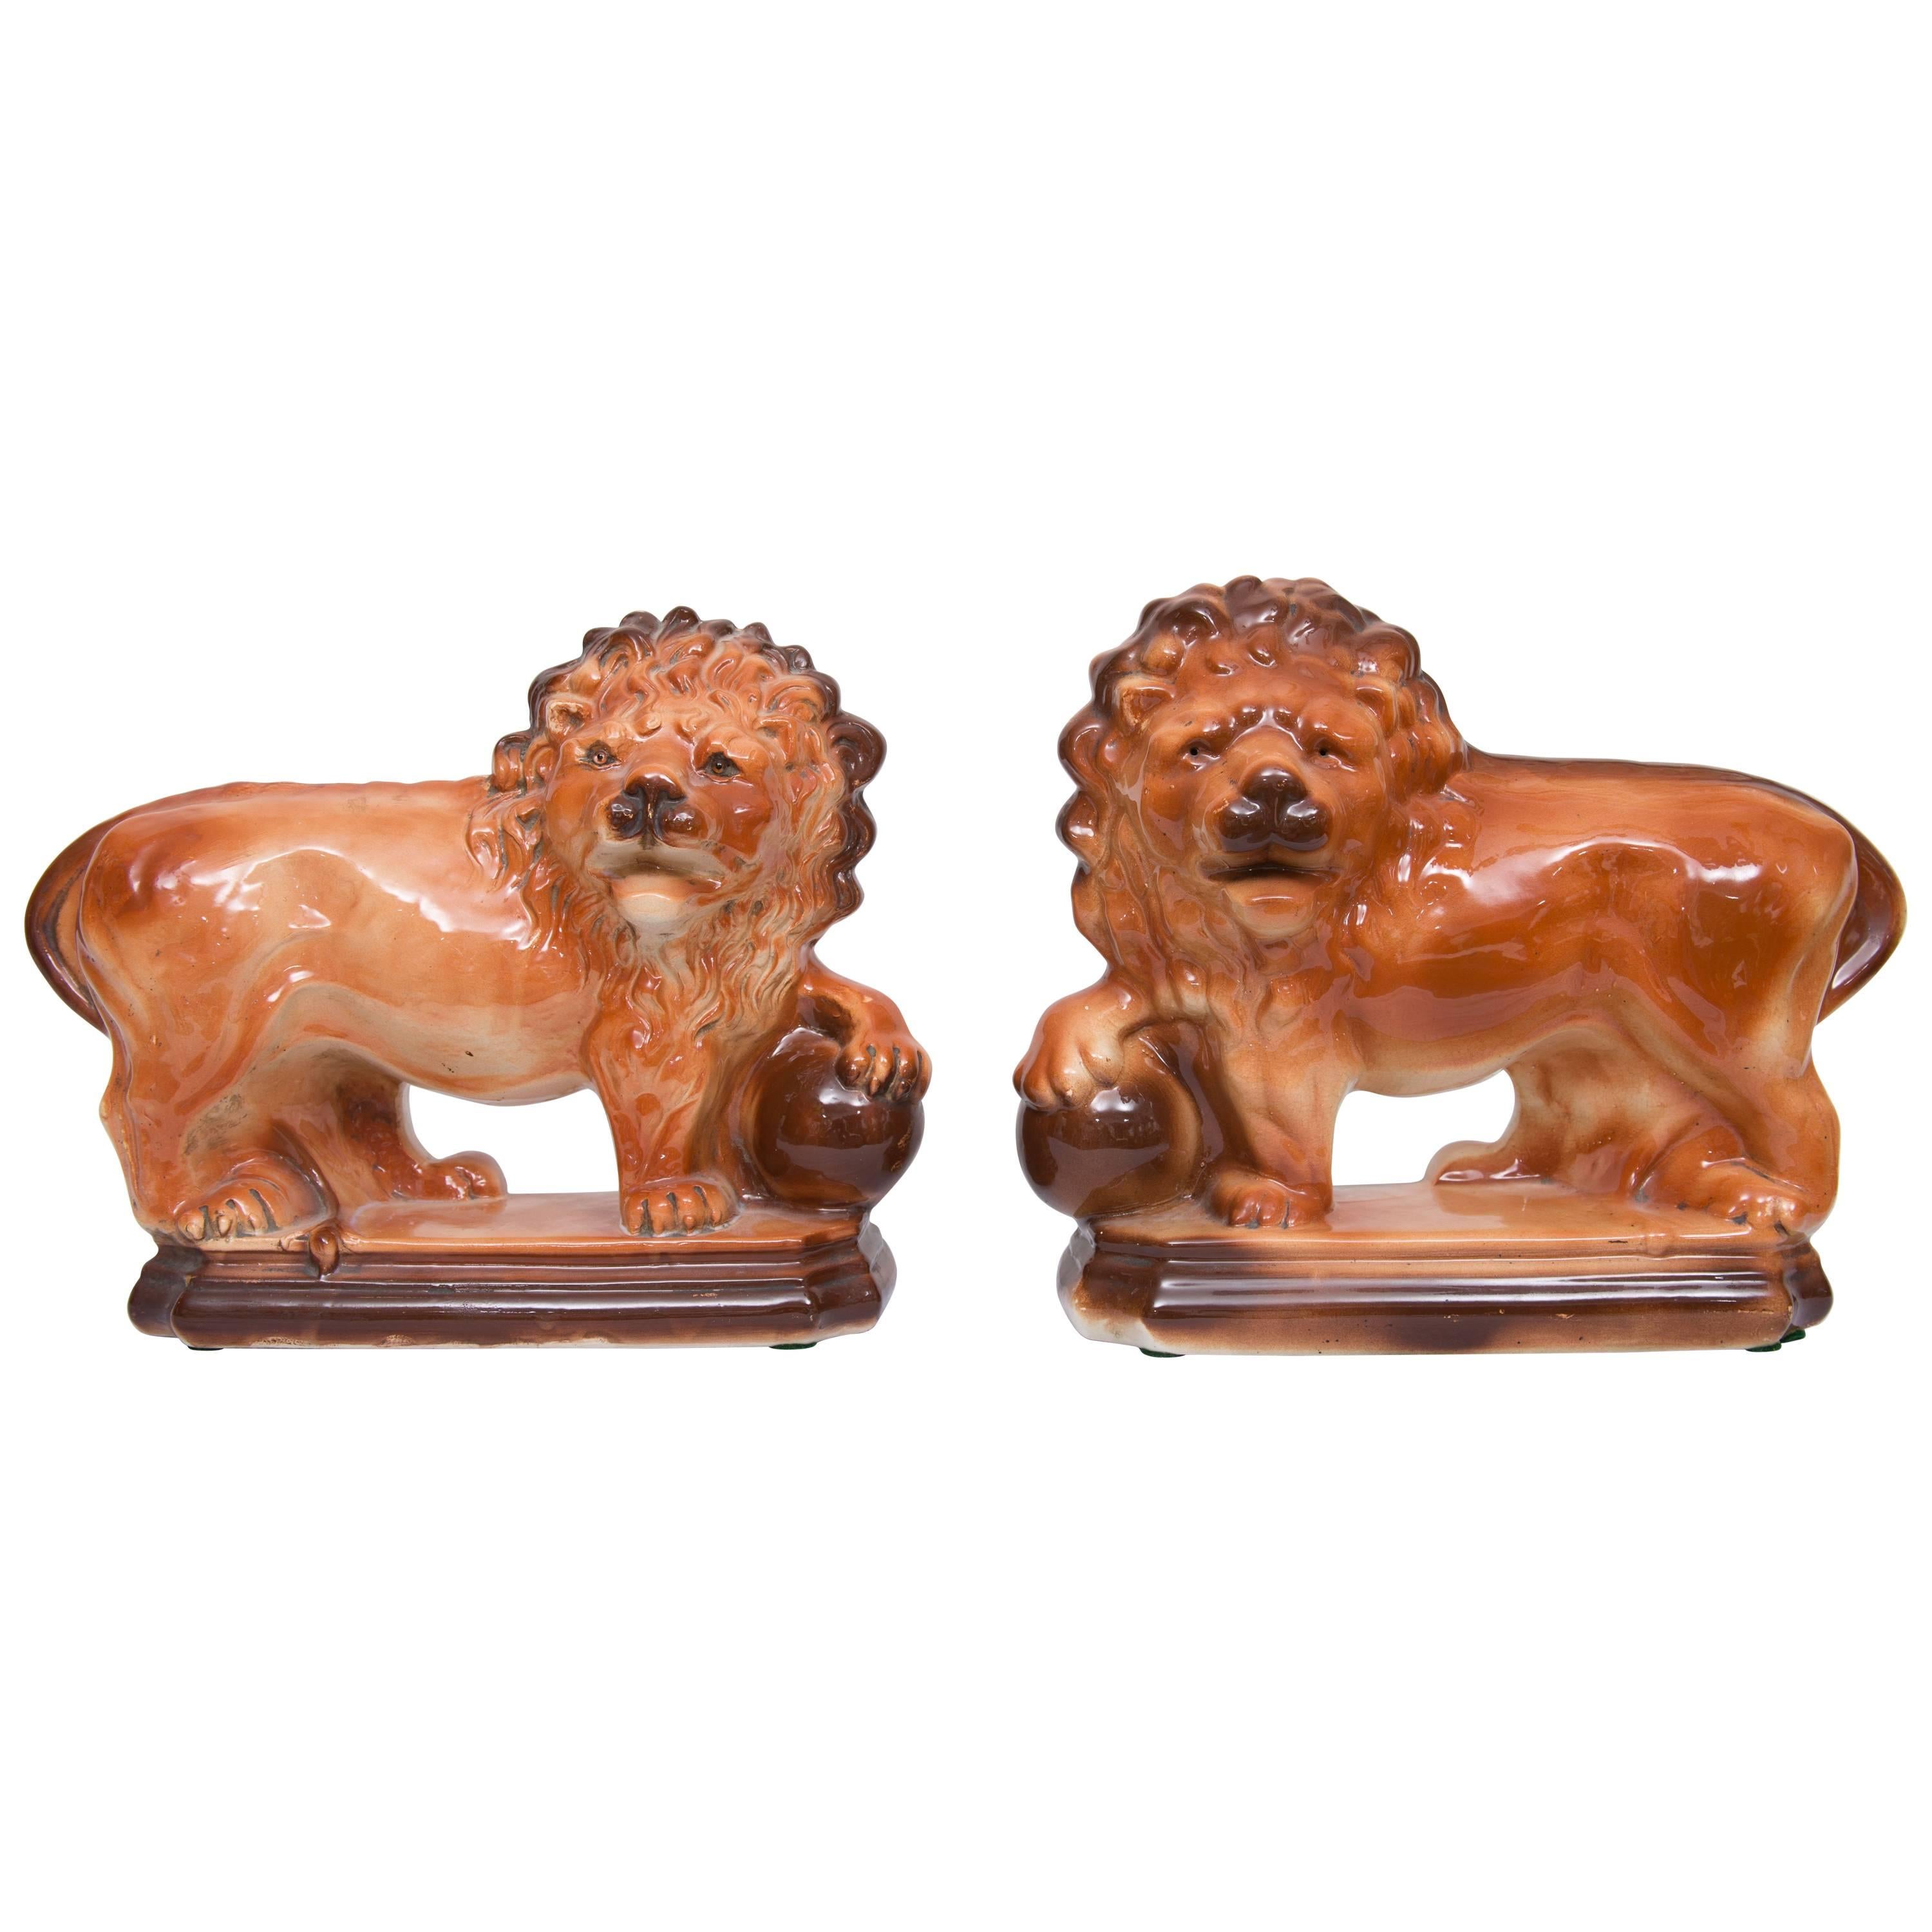 Pair of Ceramic and Glazed Lions by Lancaster & Sons (Hanley) Ltd (L&S)